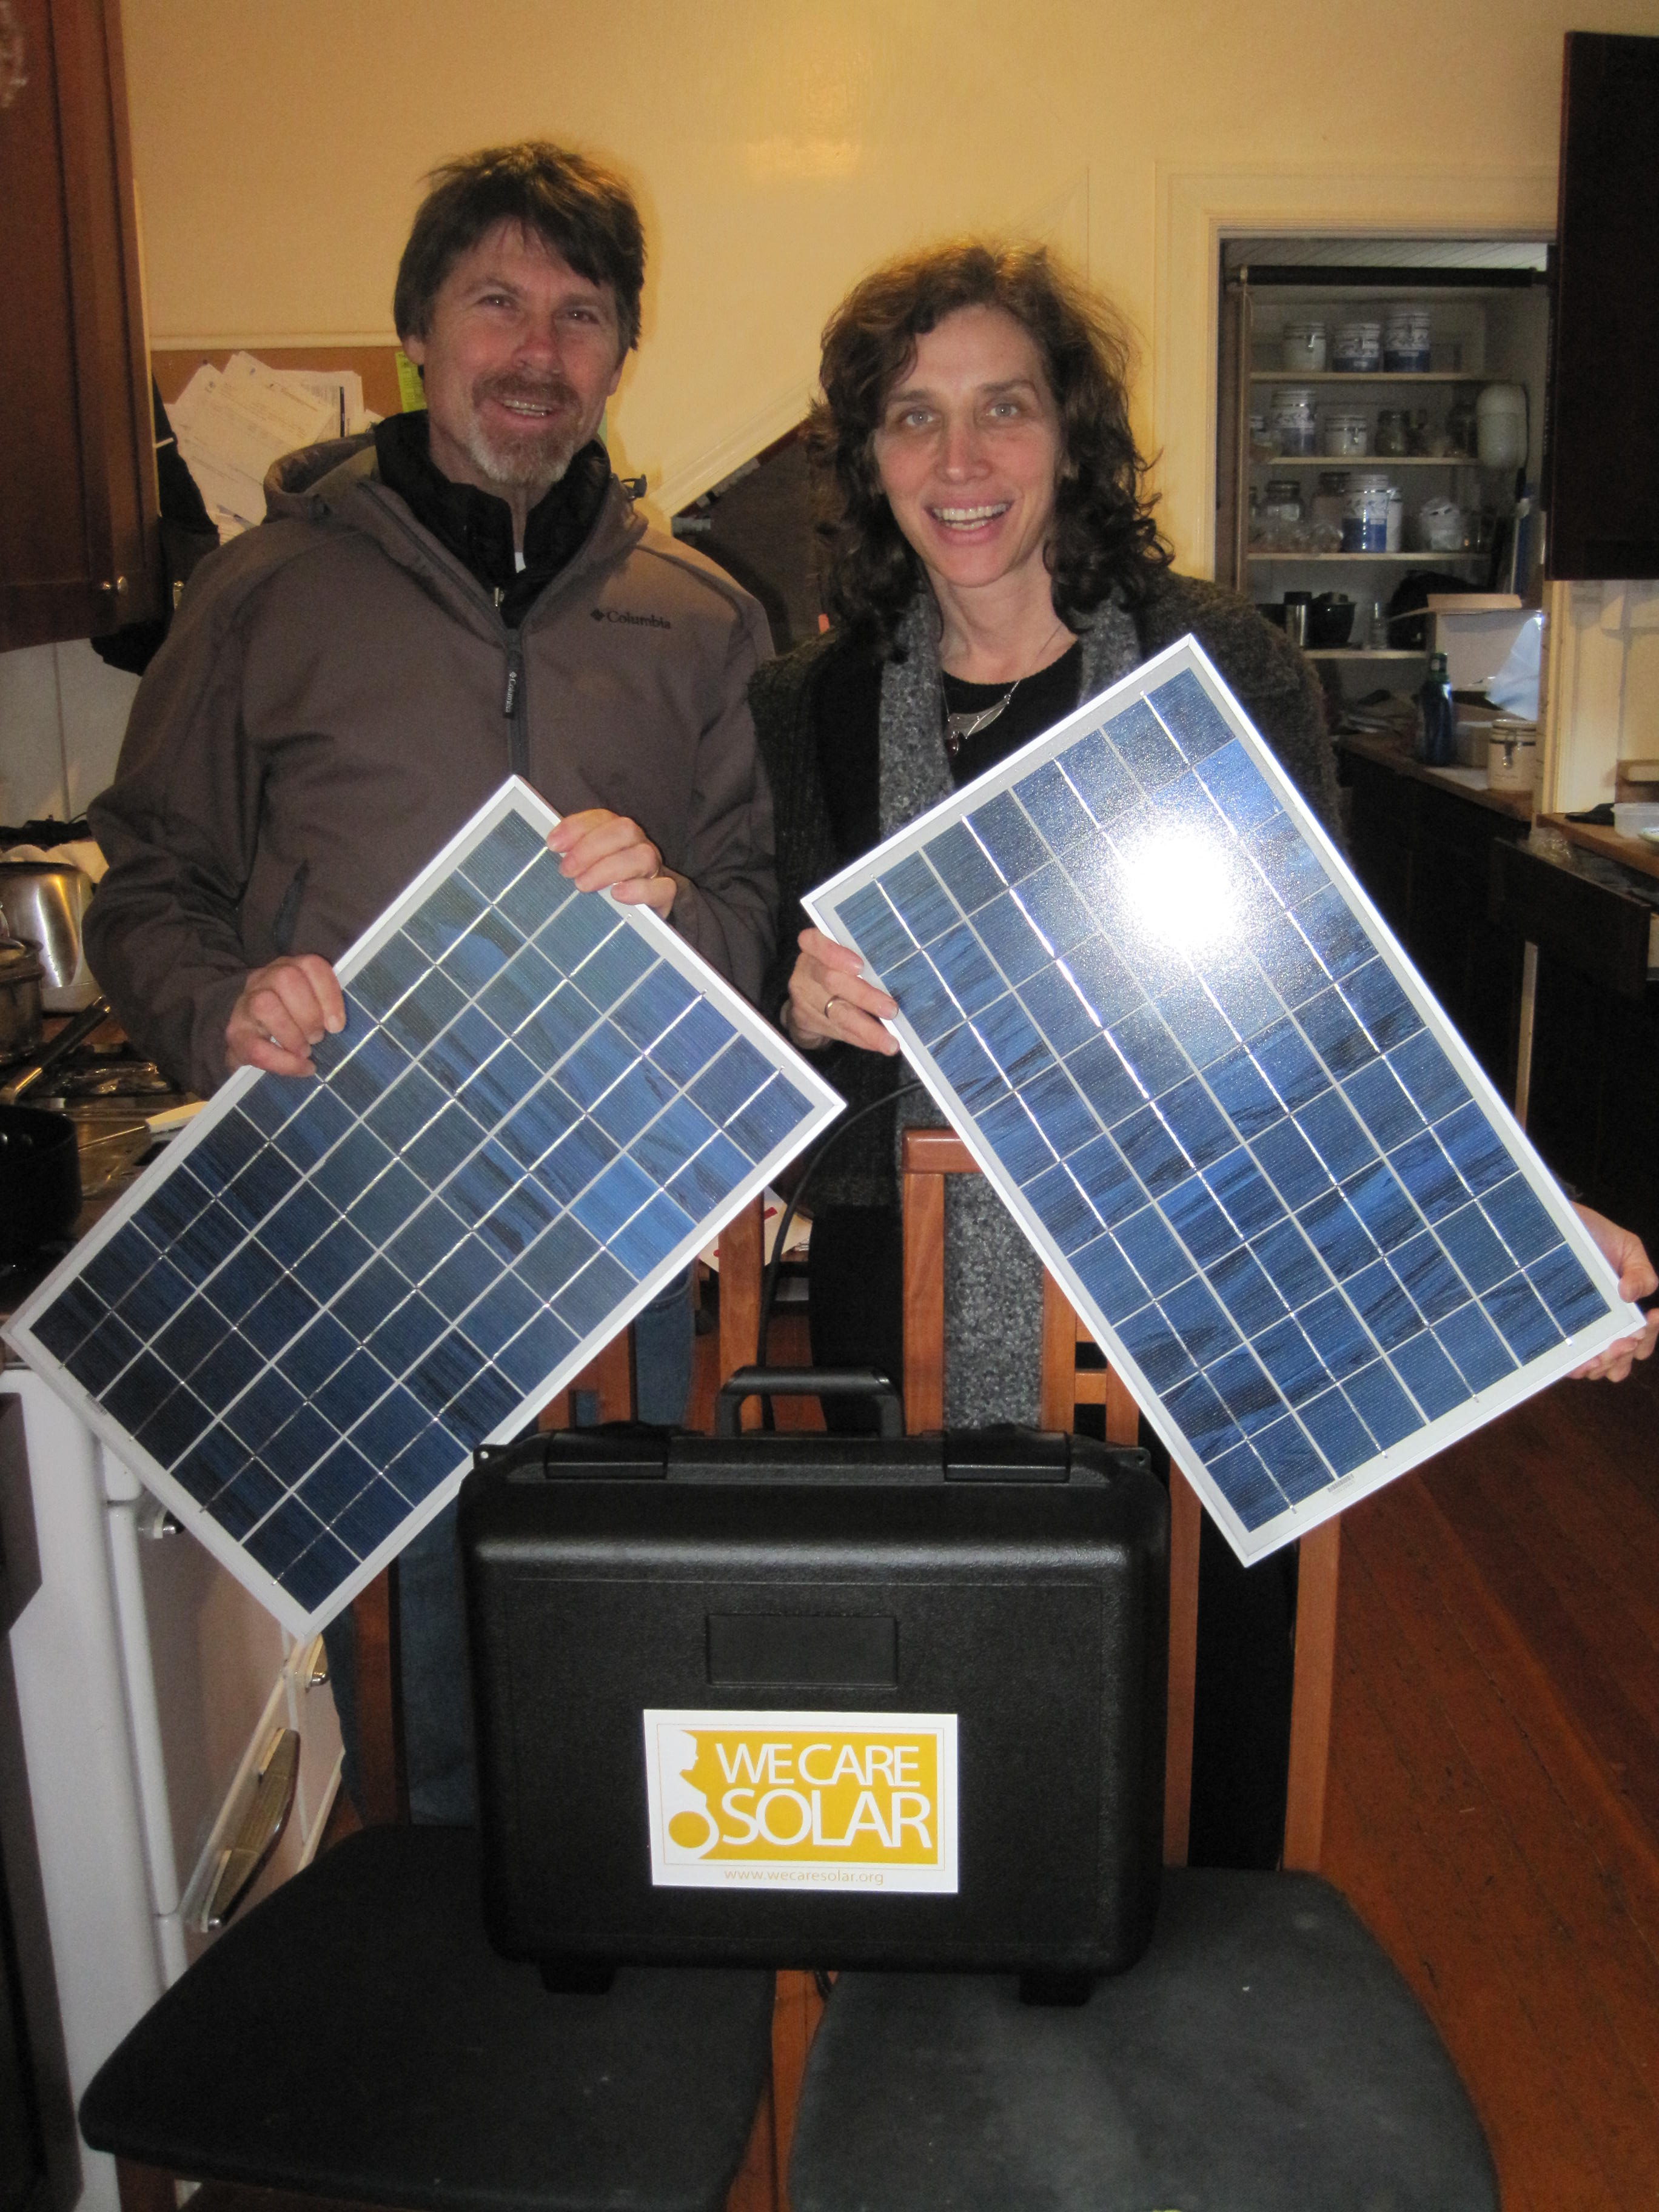 We Care Solar co-founders Hal Aronson and Laura Satchel hold the panels for a solar suitcase prototype that was sent to Africa to power medical clinics.